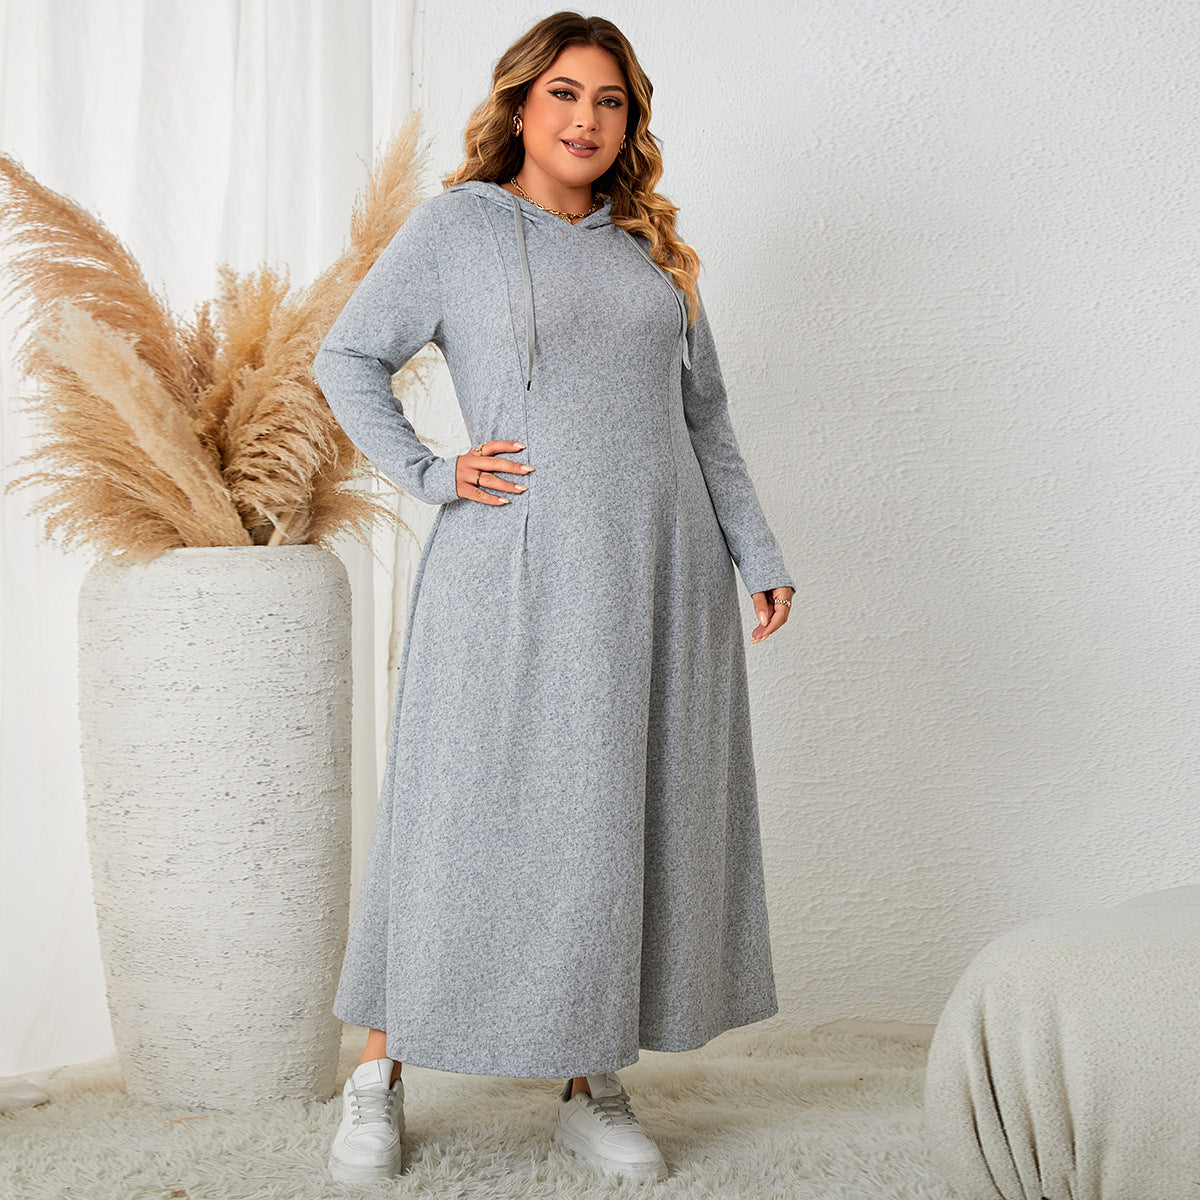 dresses  | Plus size full Sleeves Hooded Autumn wear Casual dress | |  | thecurvestory.myshopify.com